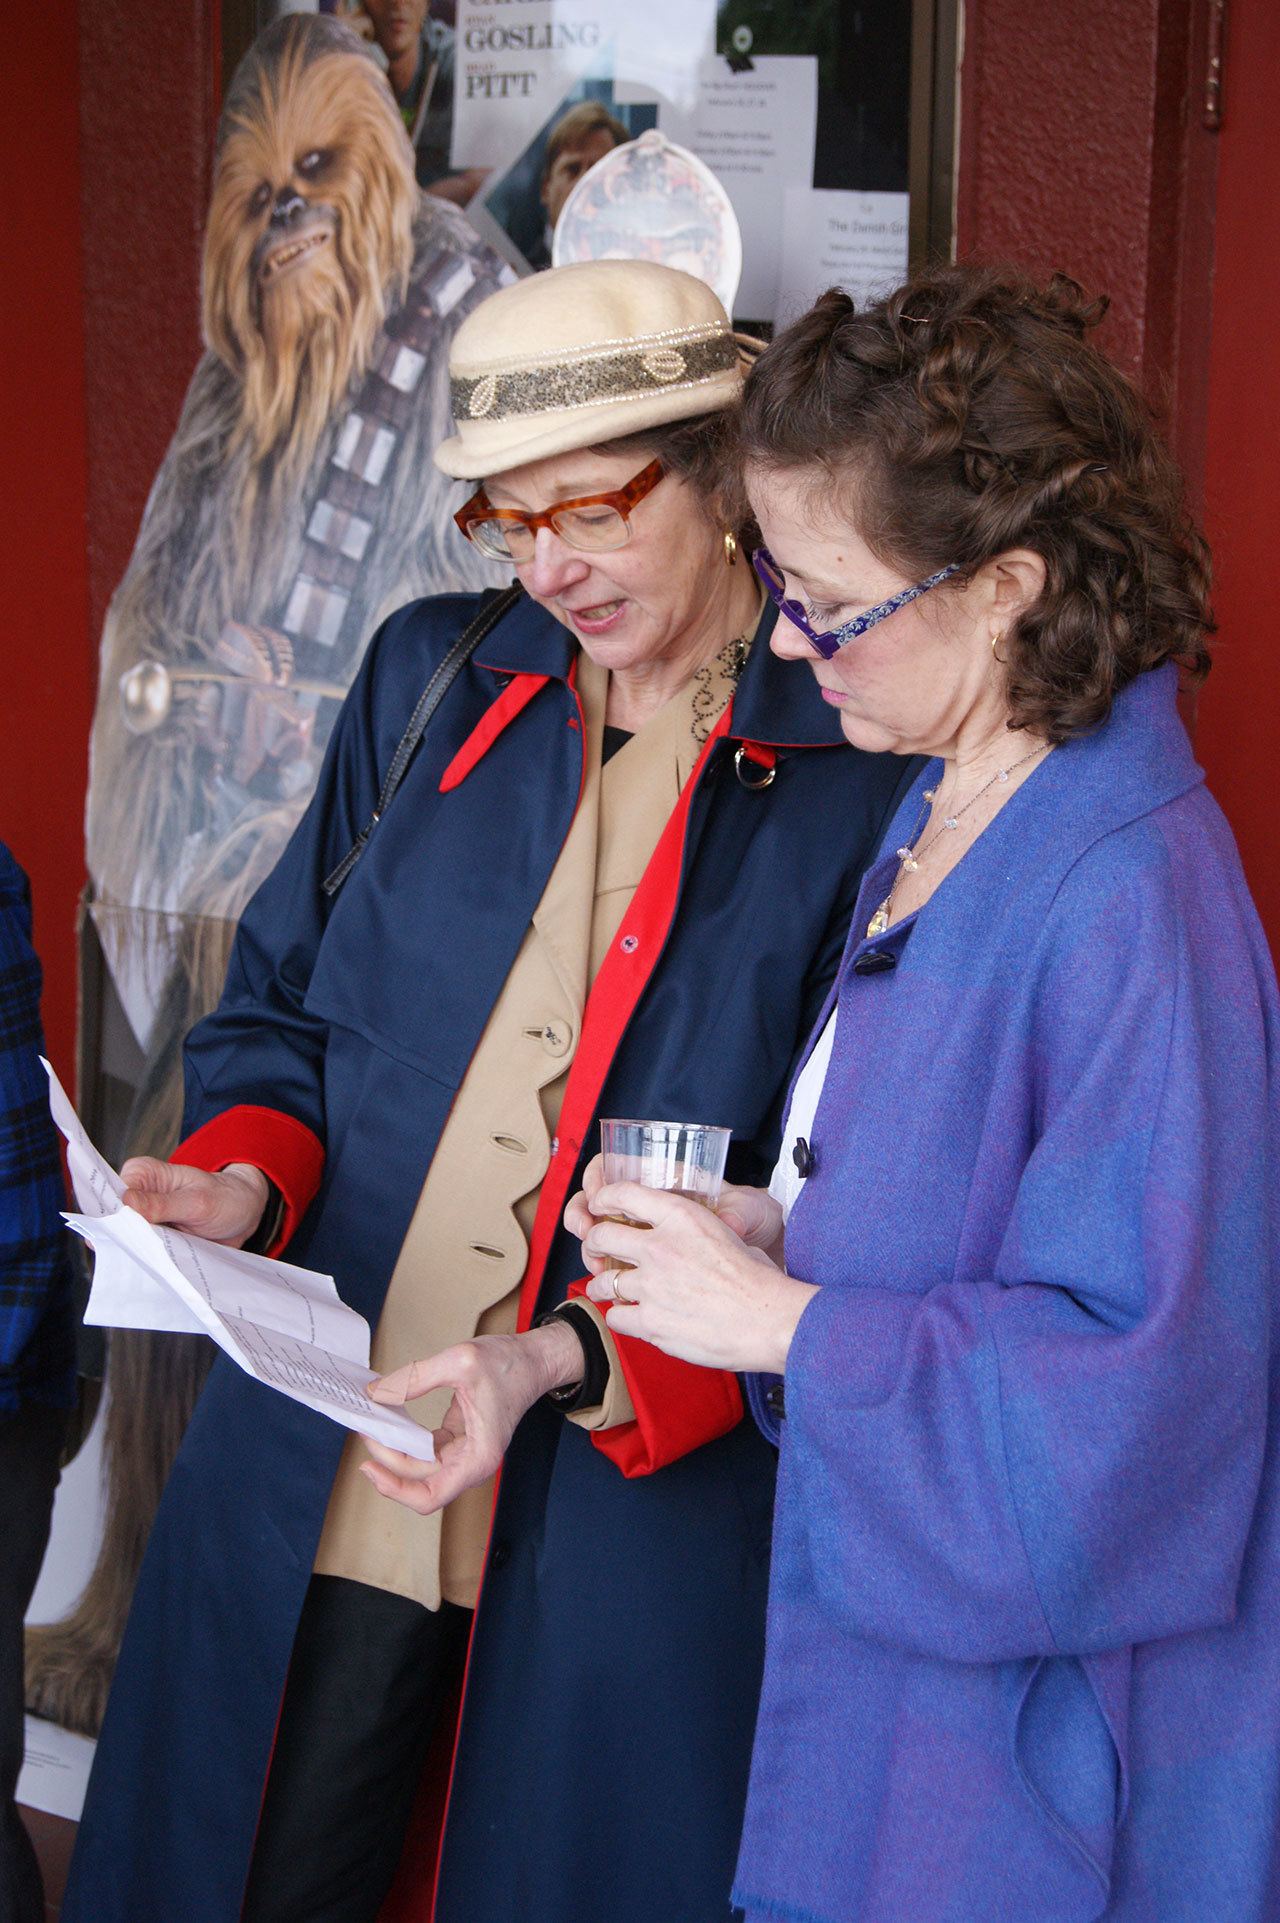 Oscar Night party-goers review the list of Oscar nominees and the evening’s schedule ahead of 2016’s Oscar Night event at the Vashon Theatre. (Anneli Fogt/Staff Photo)